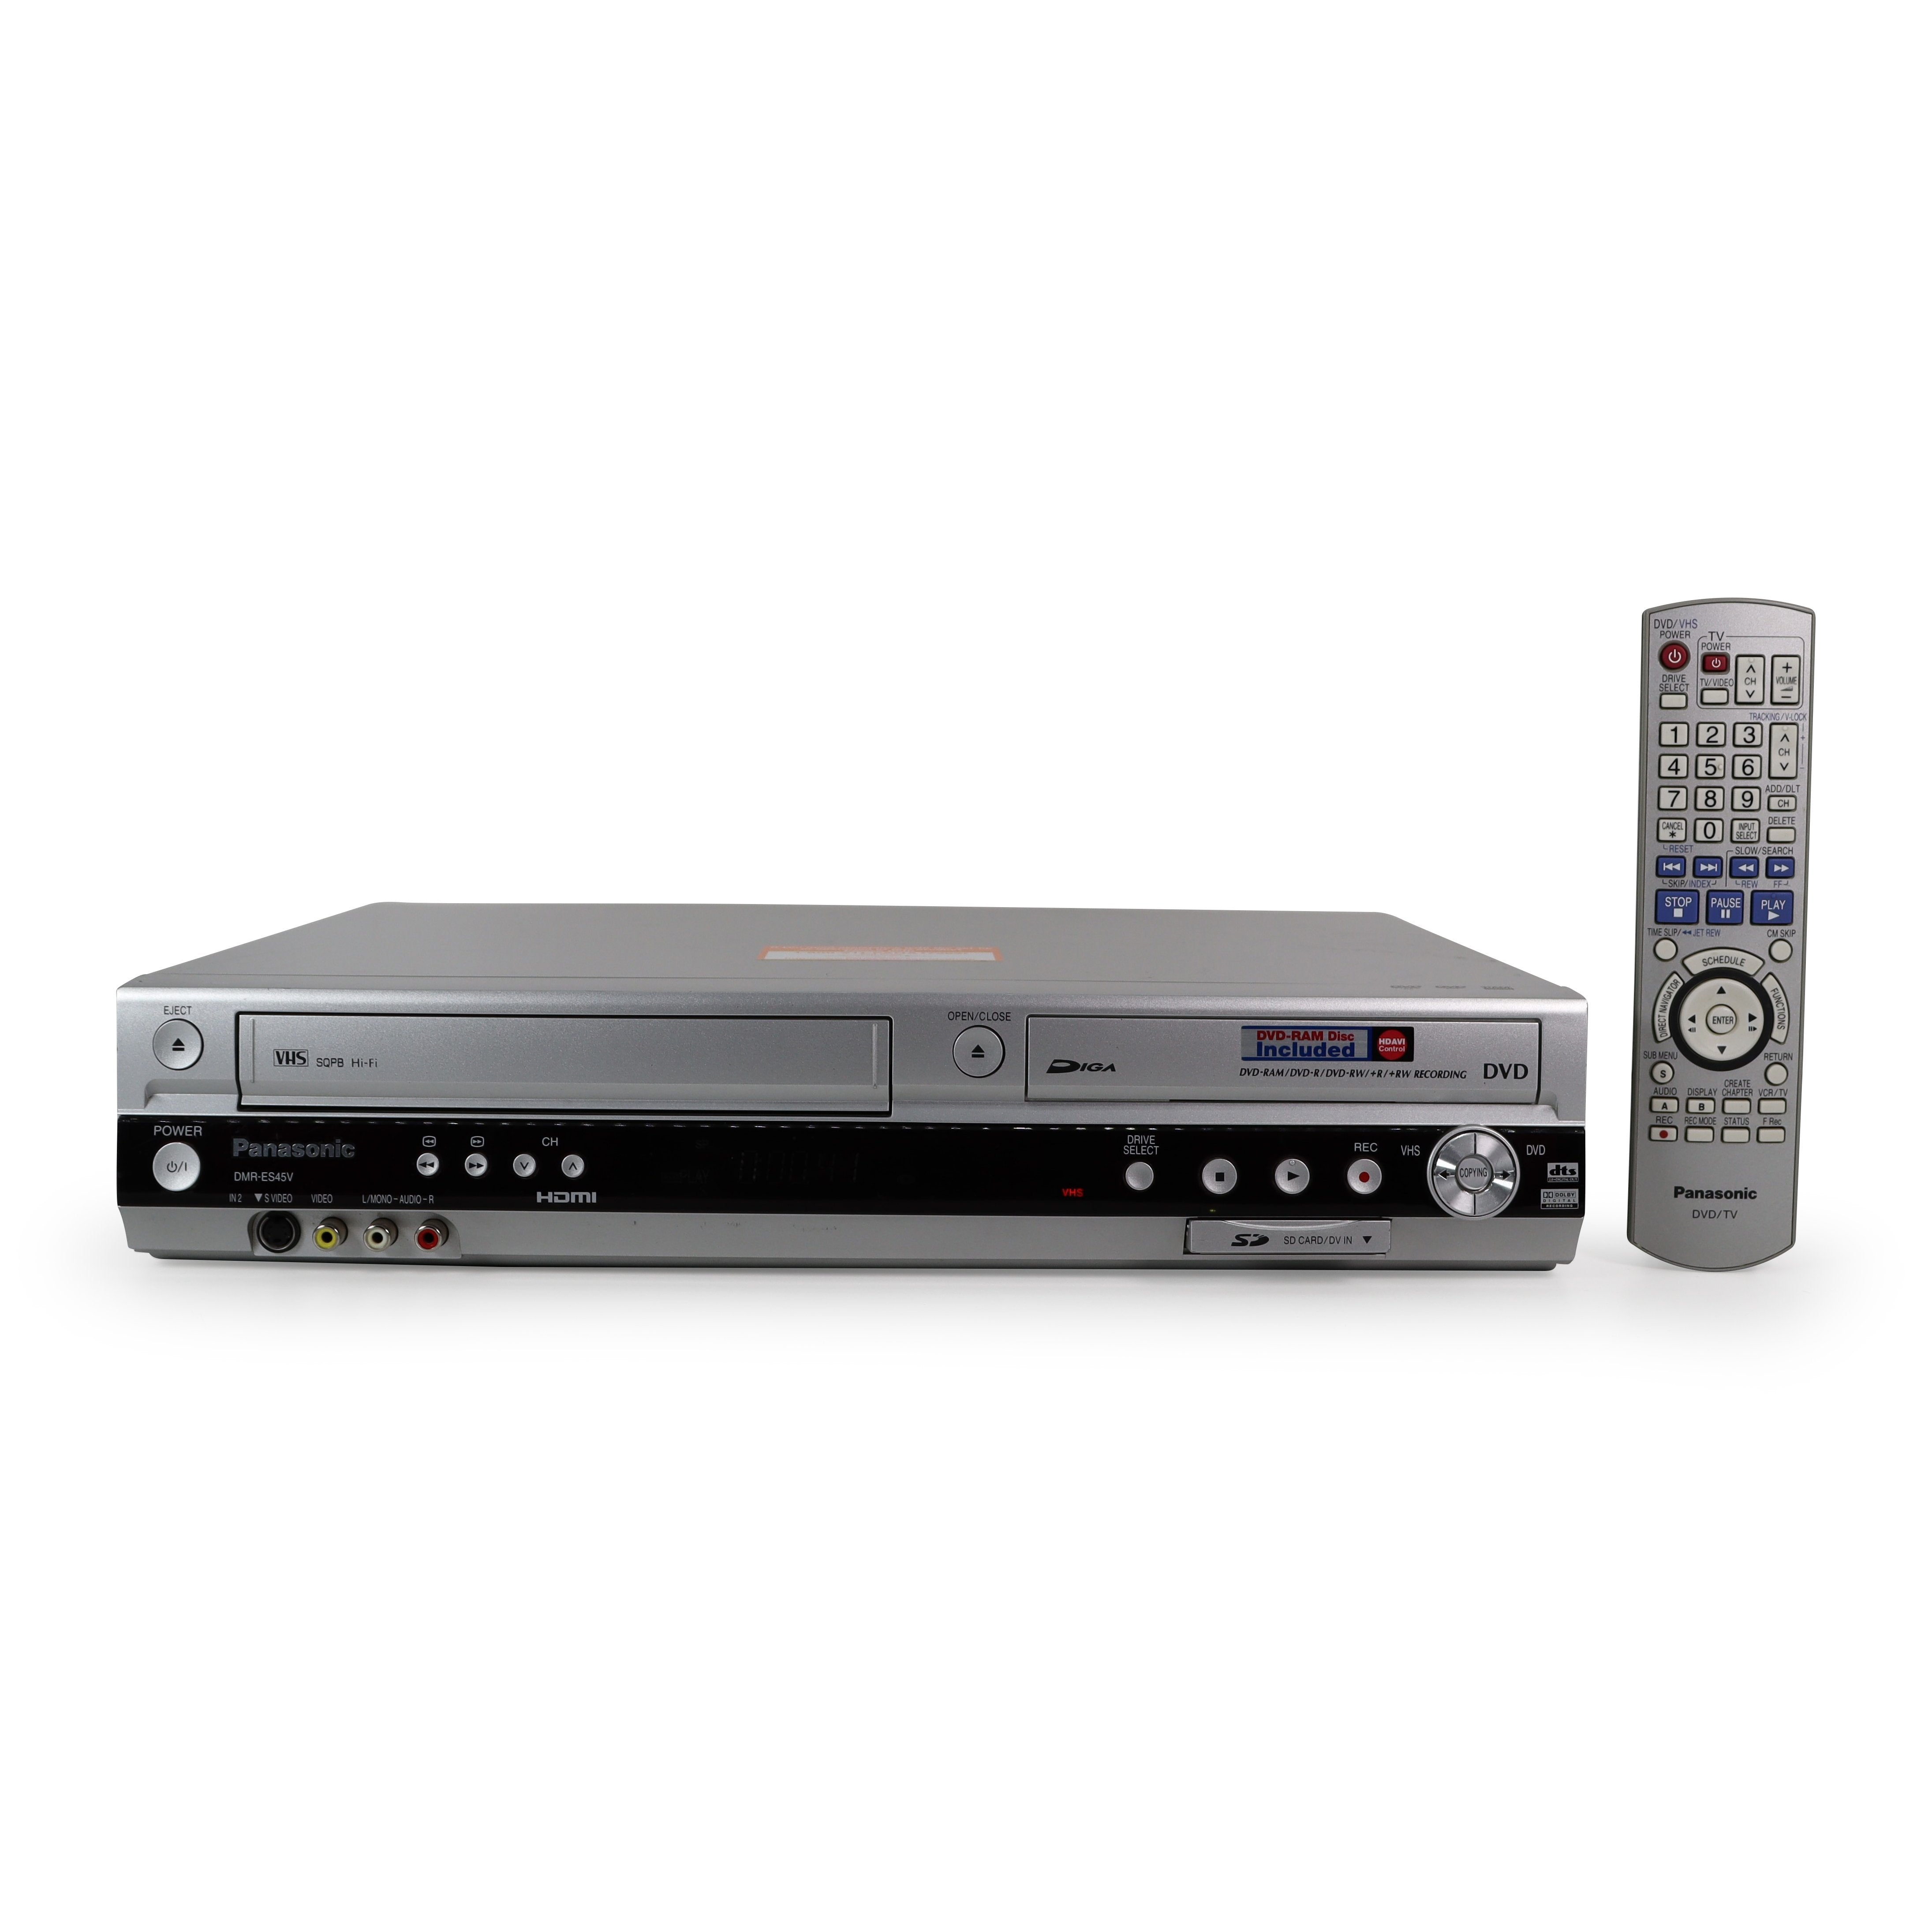 Panasonic DMR-EZ45V DVD/VHS Combi with Freeview Tuner, HDMI with 720p/1080i  upscaling, SD Card slot for Jpeg playback